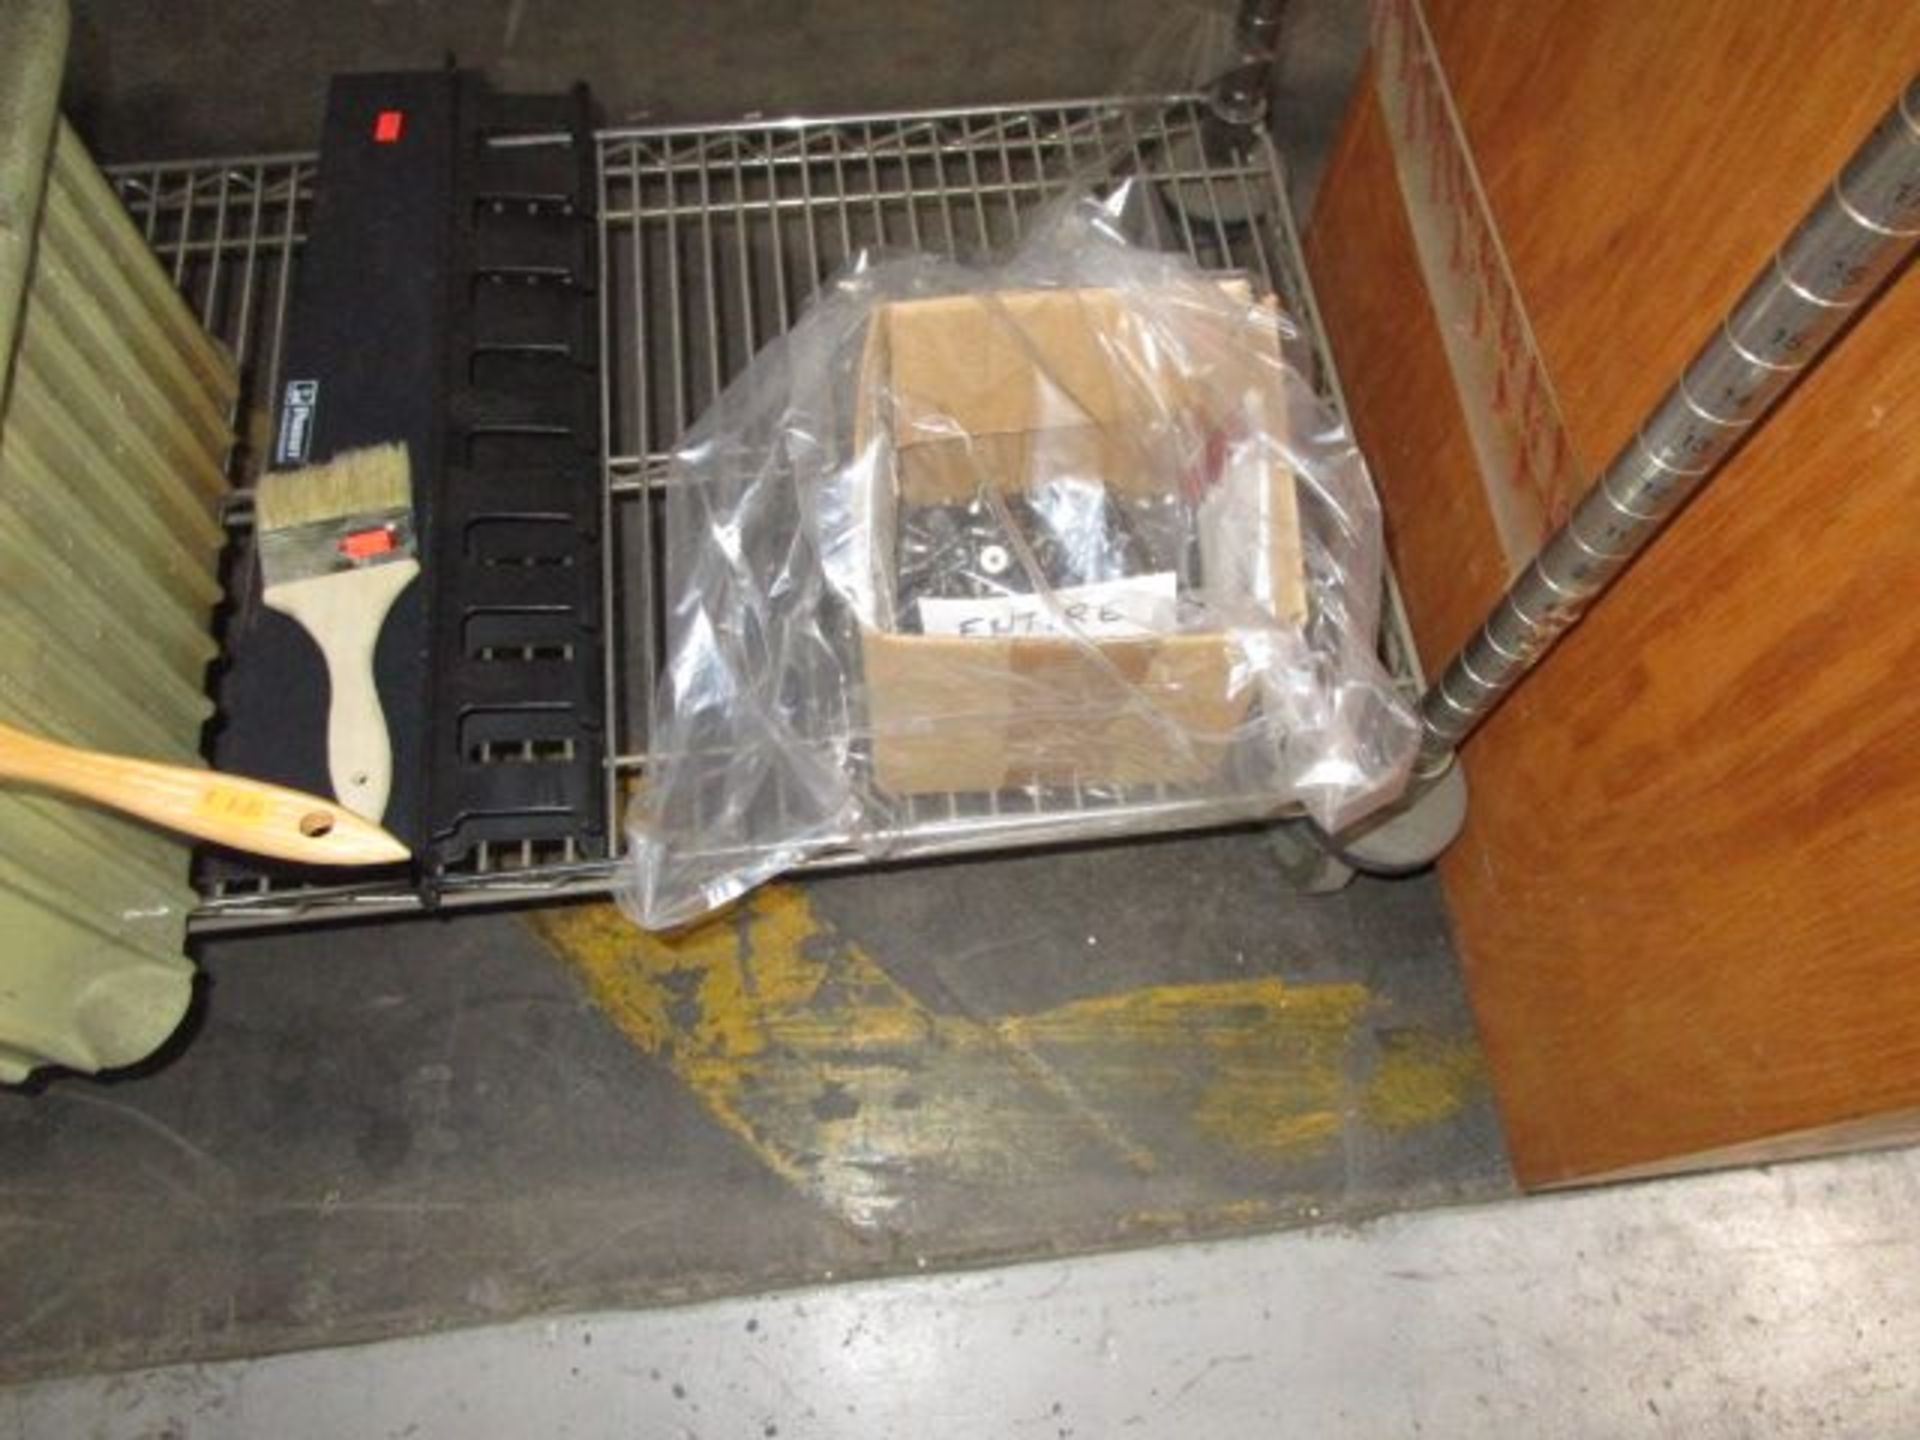 SHELVING UNIT OF CORD/ROPE, BOX OF CHASSIS, PLASTIC FITTINGS - Image 9 of 9